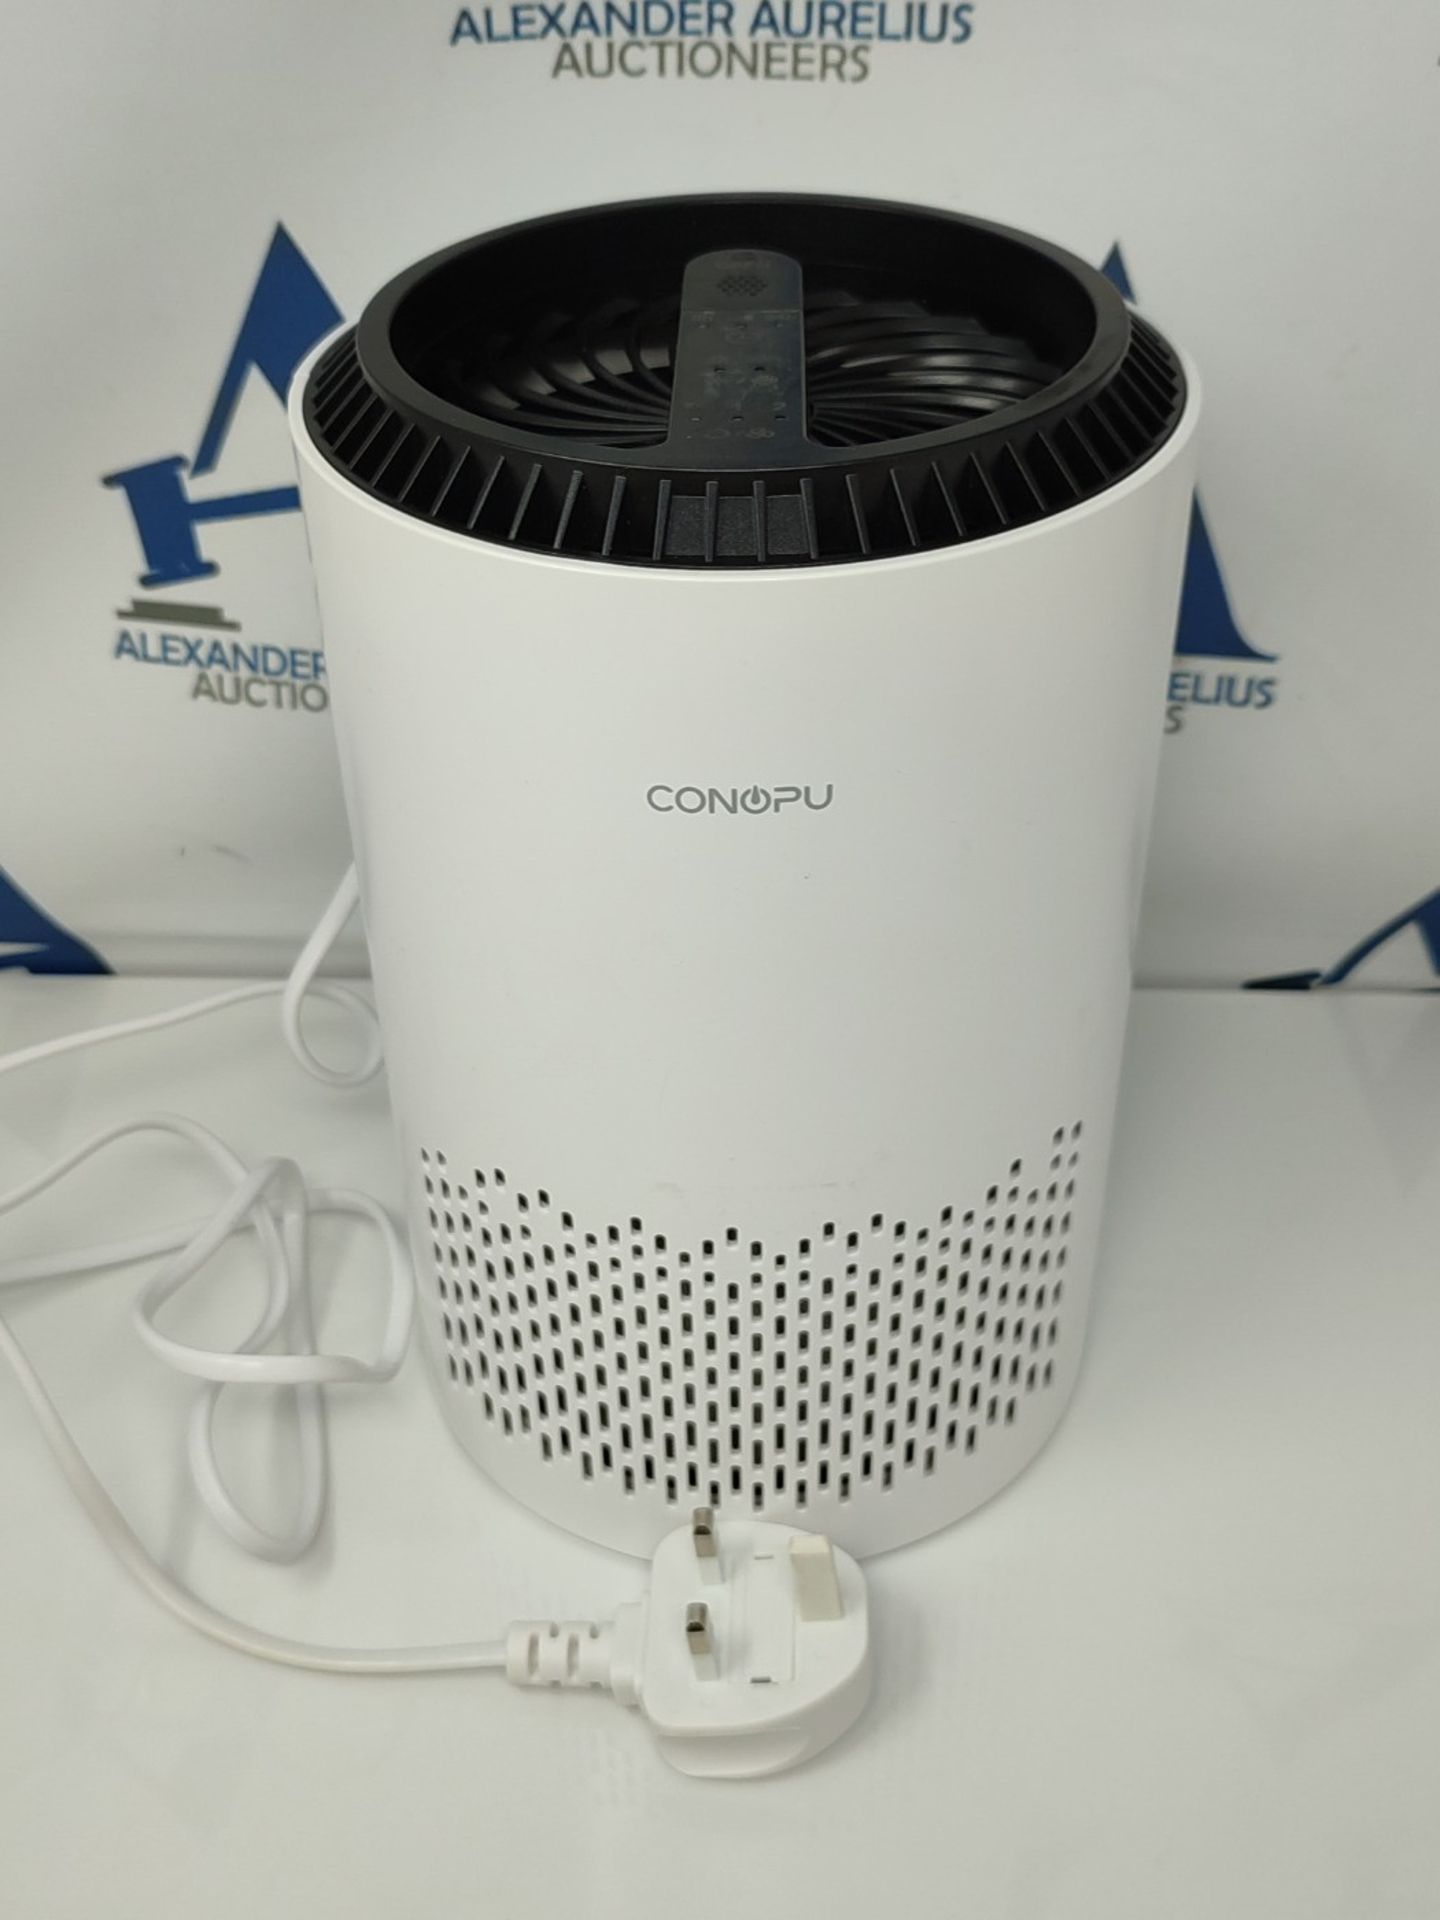 CONOPU Air Purifier for Home Bedroom with Hepa H13 99.97% Filter, Air Cleaner portable - Image 3 of 3